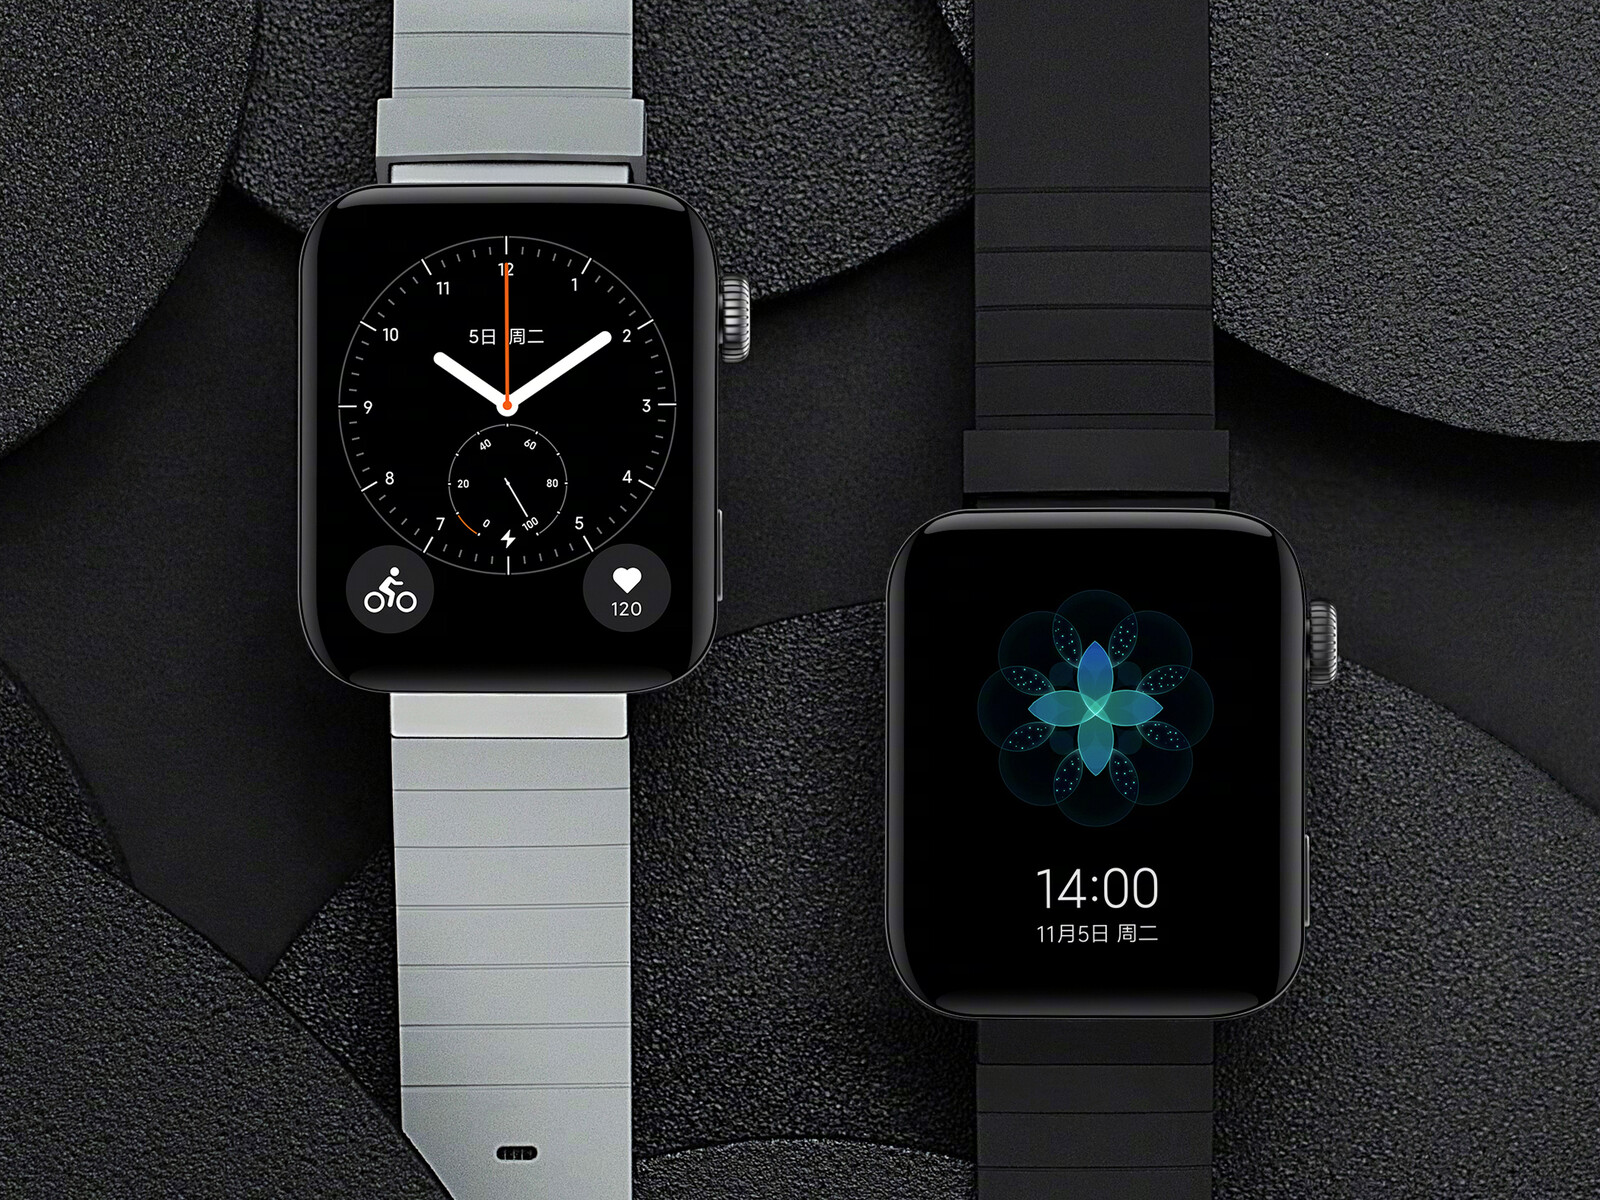 Xiaomi Mi Watch A Us 170 Apple Watch Clone With 4g Wear Os And